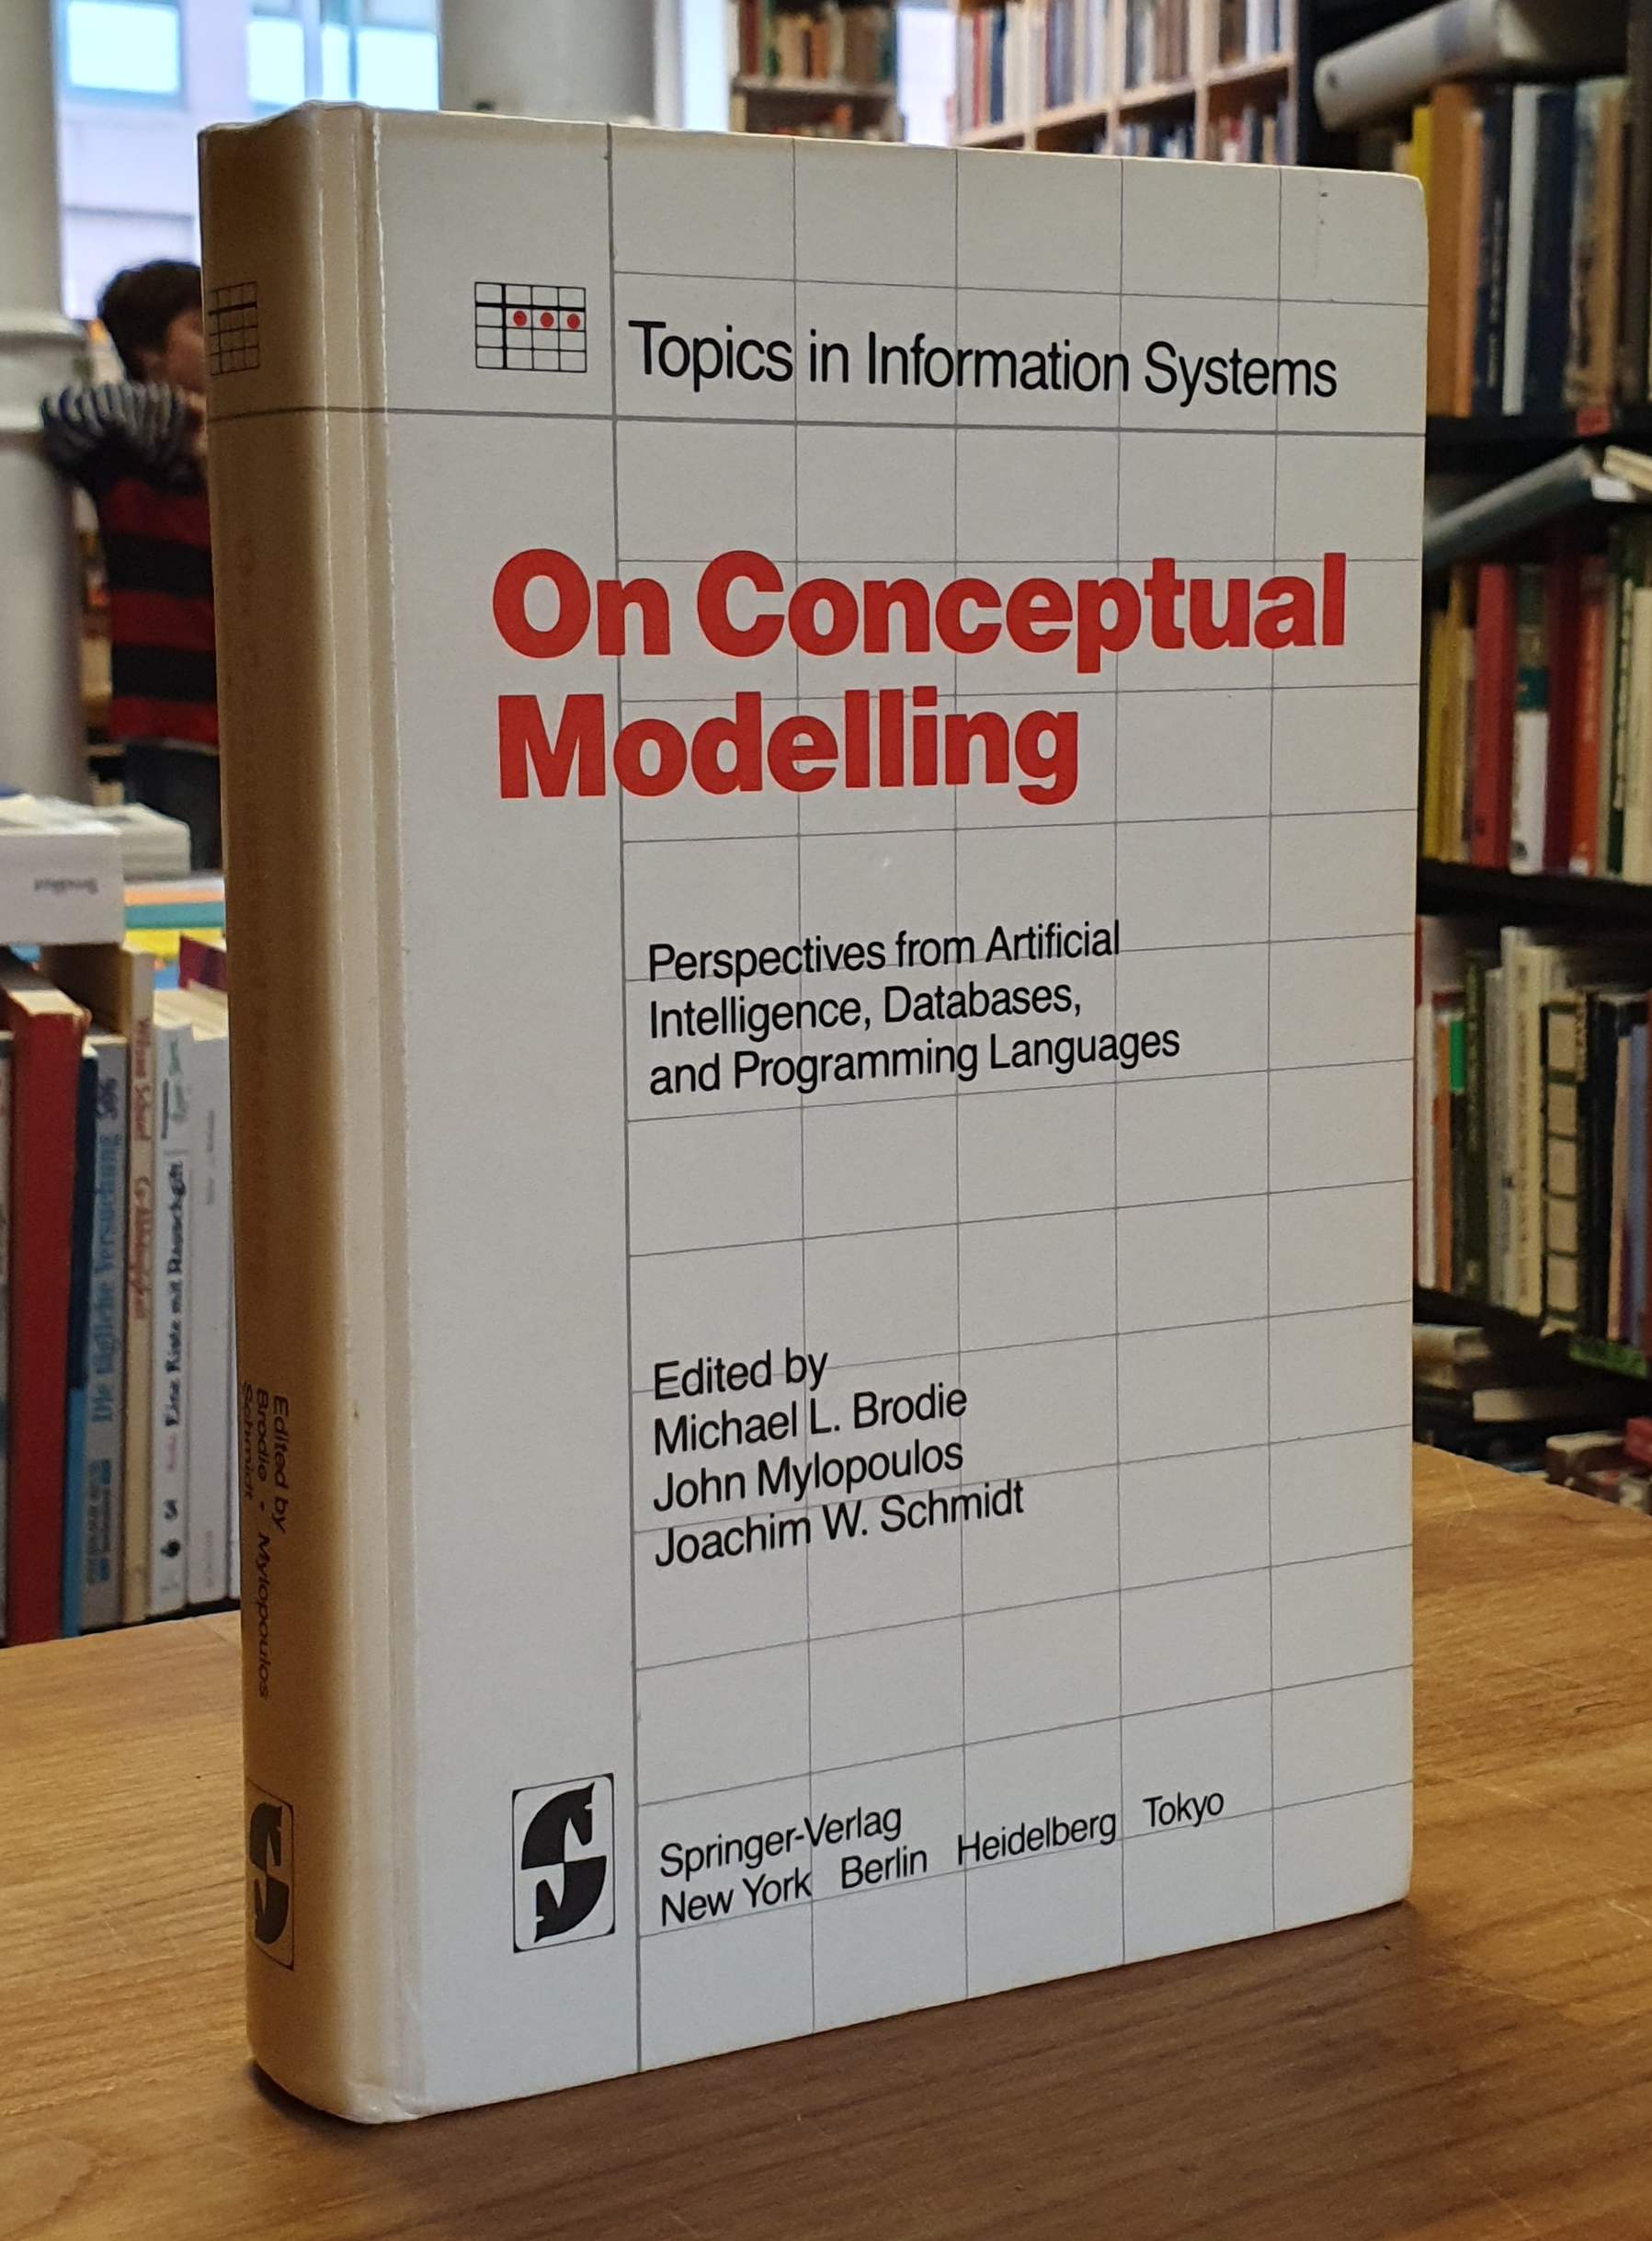 On Conceptual Modelling – Perspectives from Artificial Intelligence, Databases a